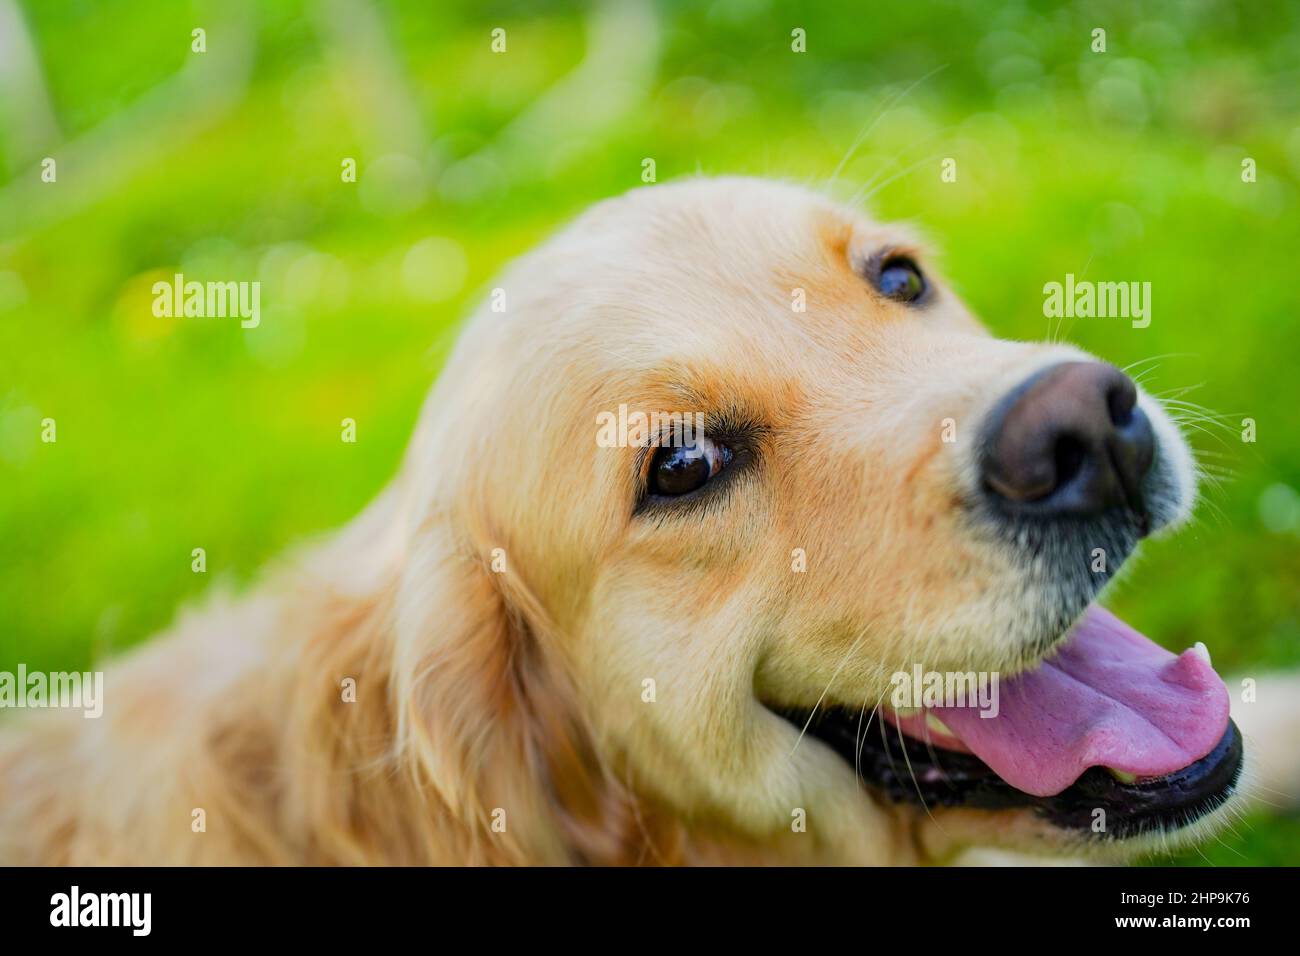 Close-up picture of a golden retrievers face against a green grass background Stock Photo